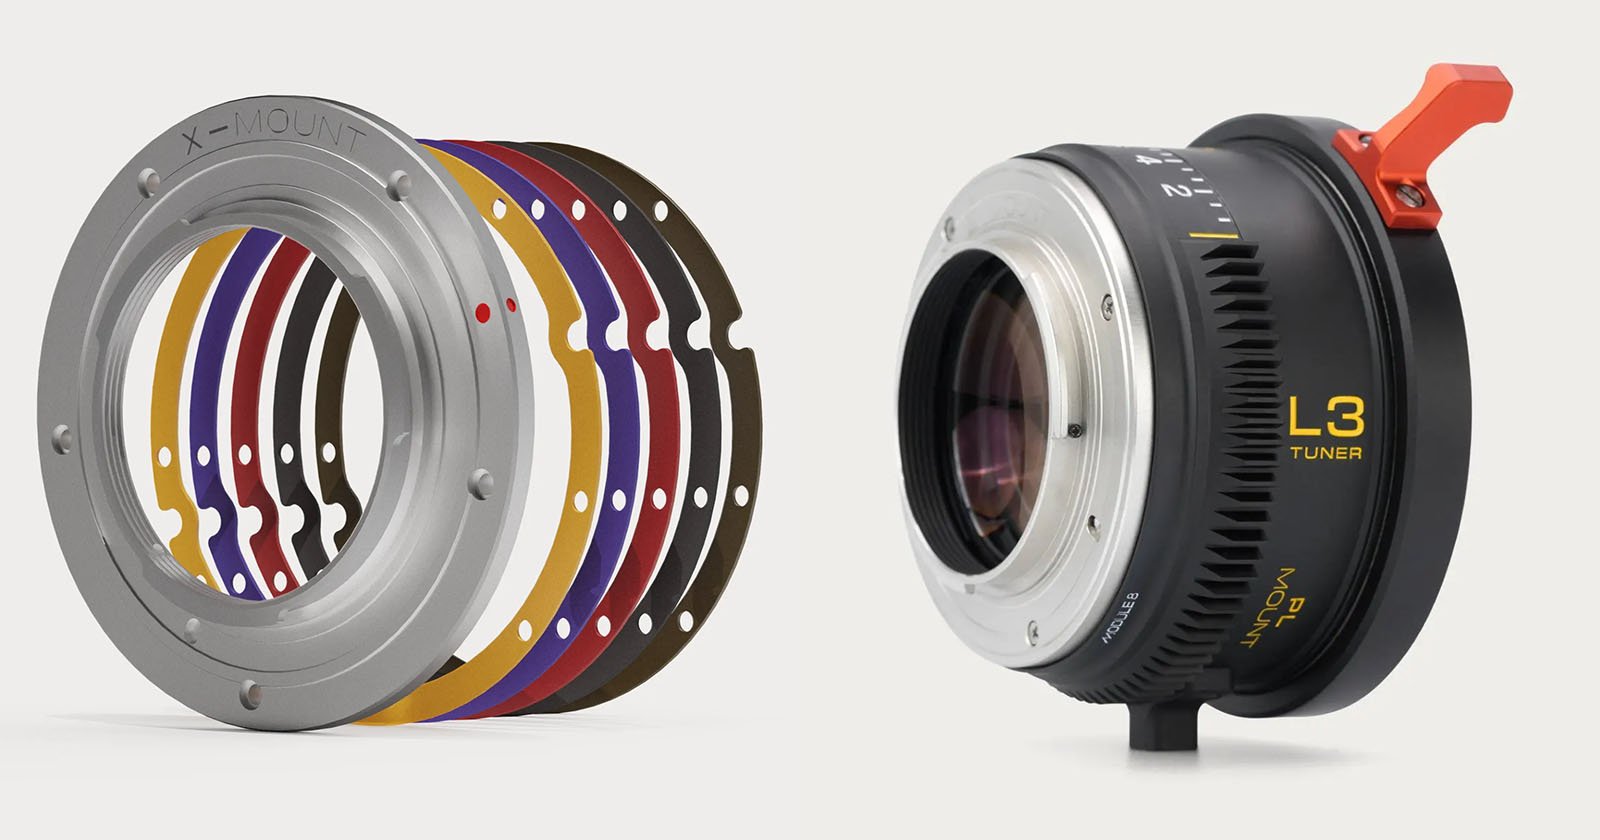 Module 8’s Clever Vintage-Inspired Lens Tuner Coming to X and L-Mount